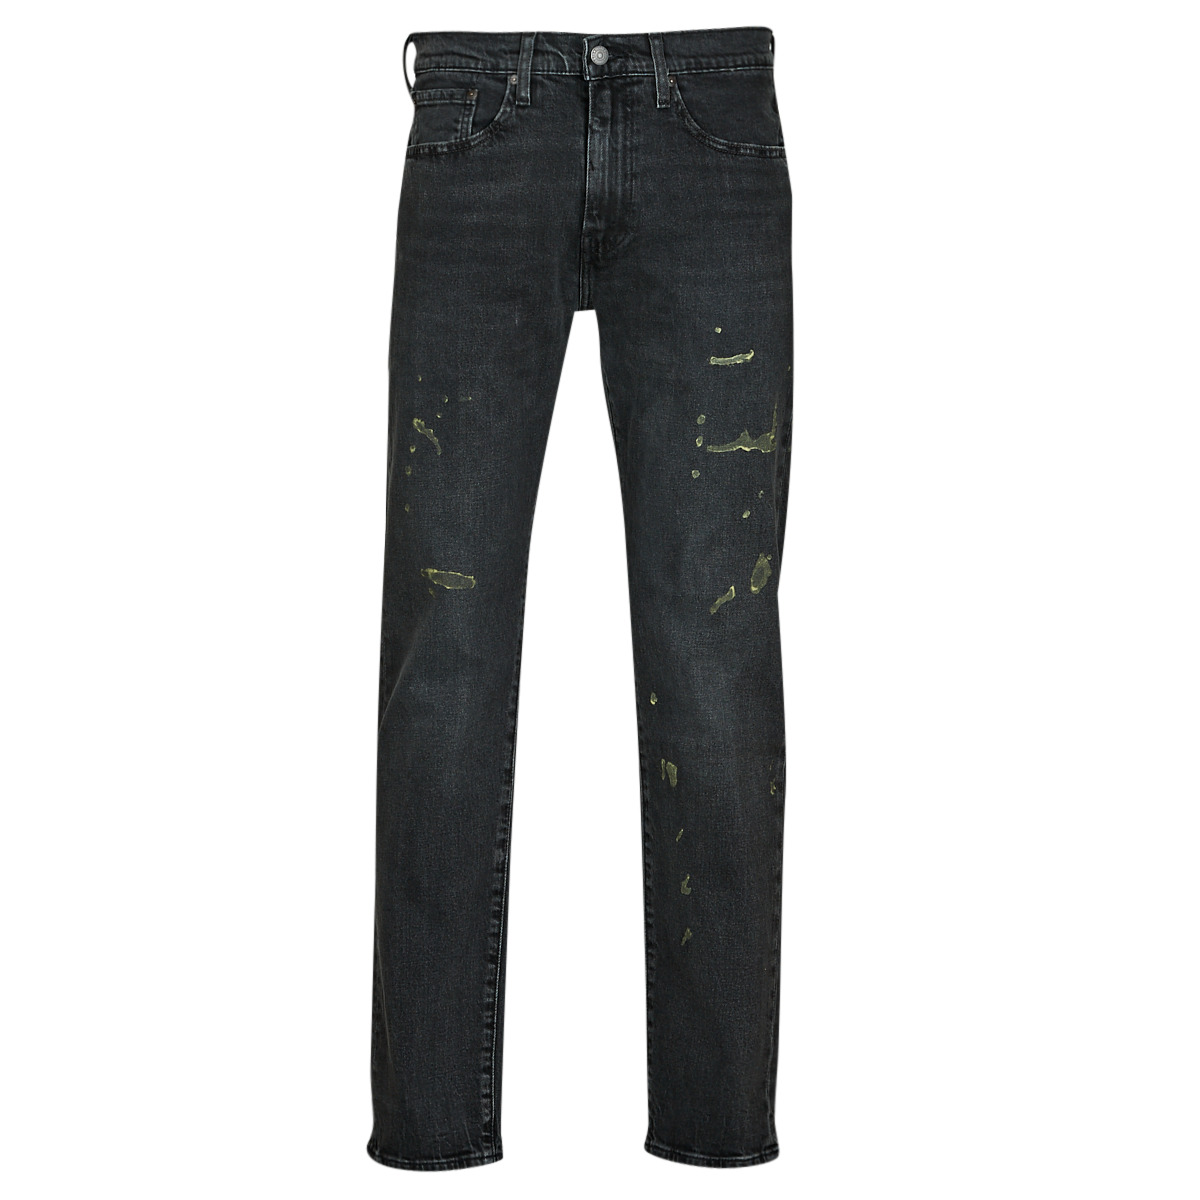 Jeans tapered / στενά τζην Levis 502 TAPER